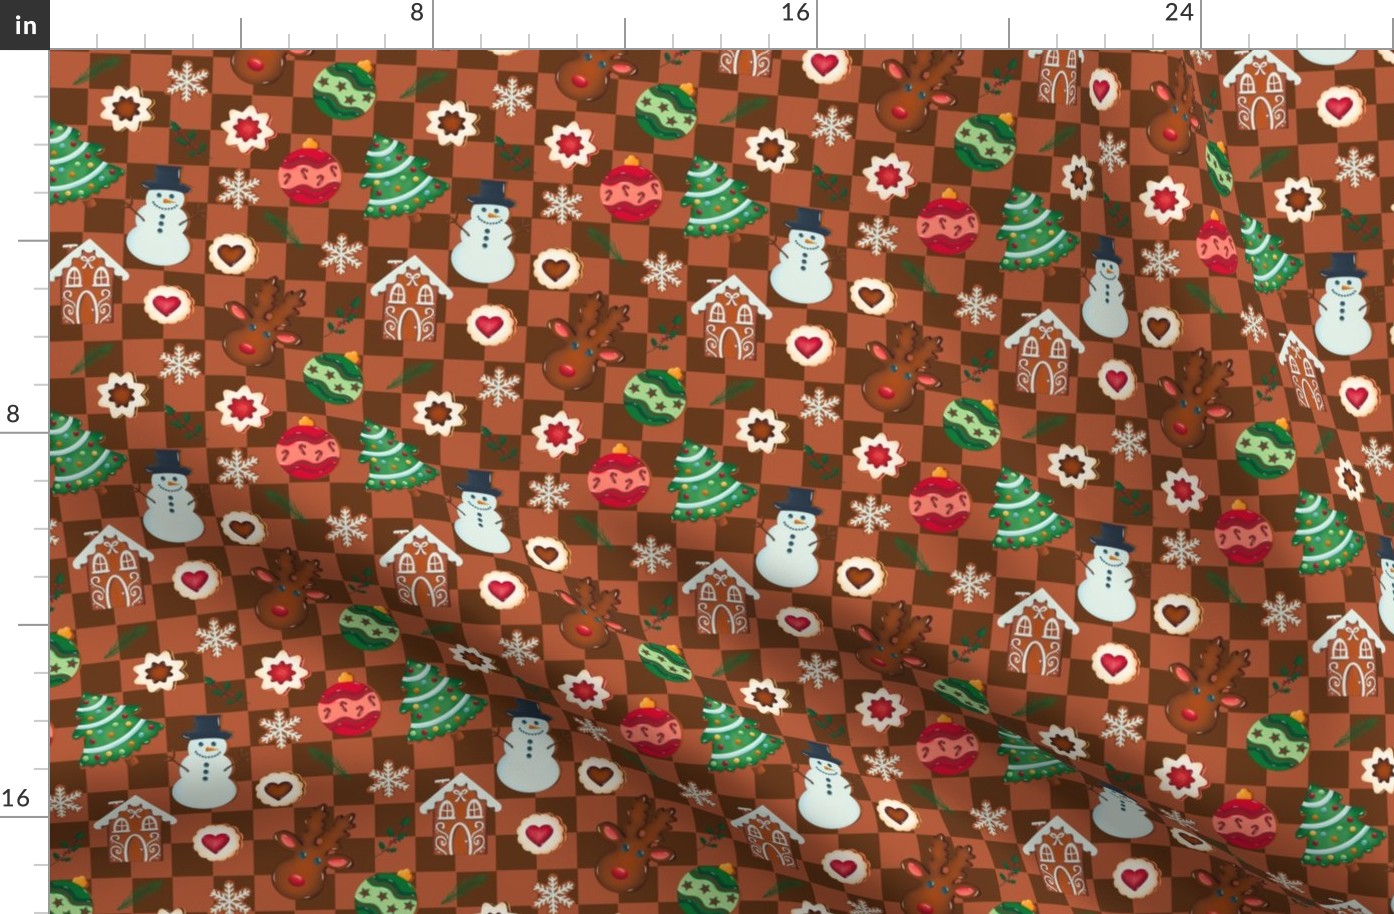 Gingerbread Cookie Bake in Ginger Cocoa Brown - 6 inches - - Kawaii Christmas Kidcore Print